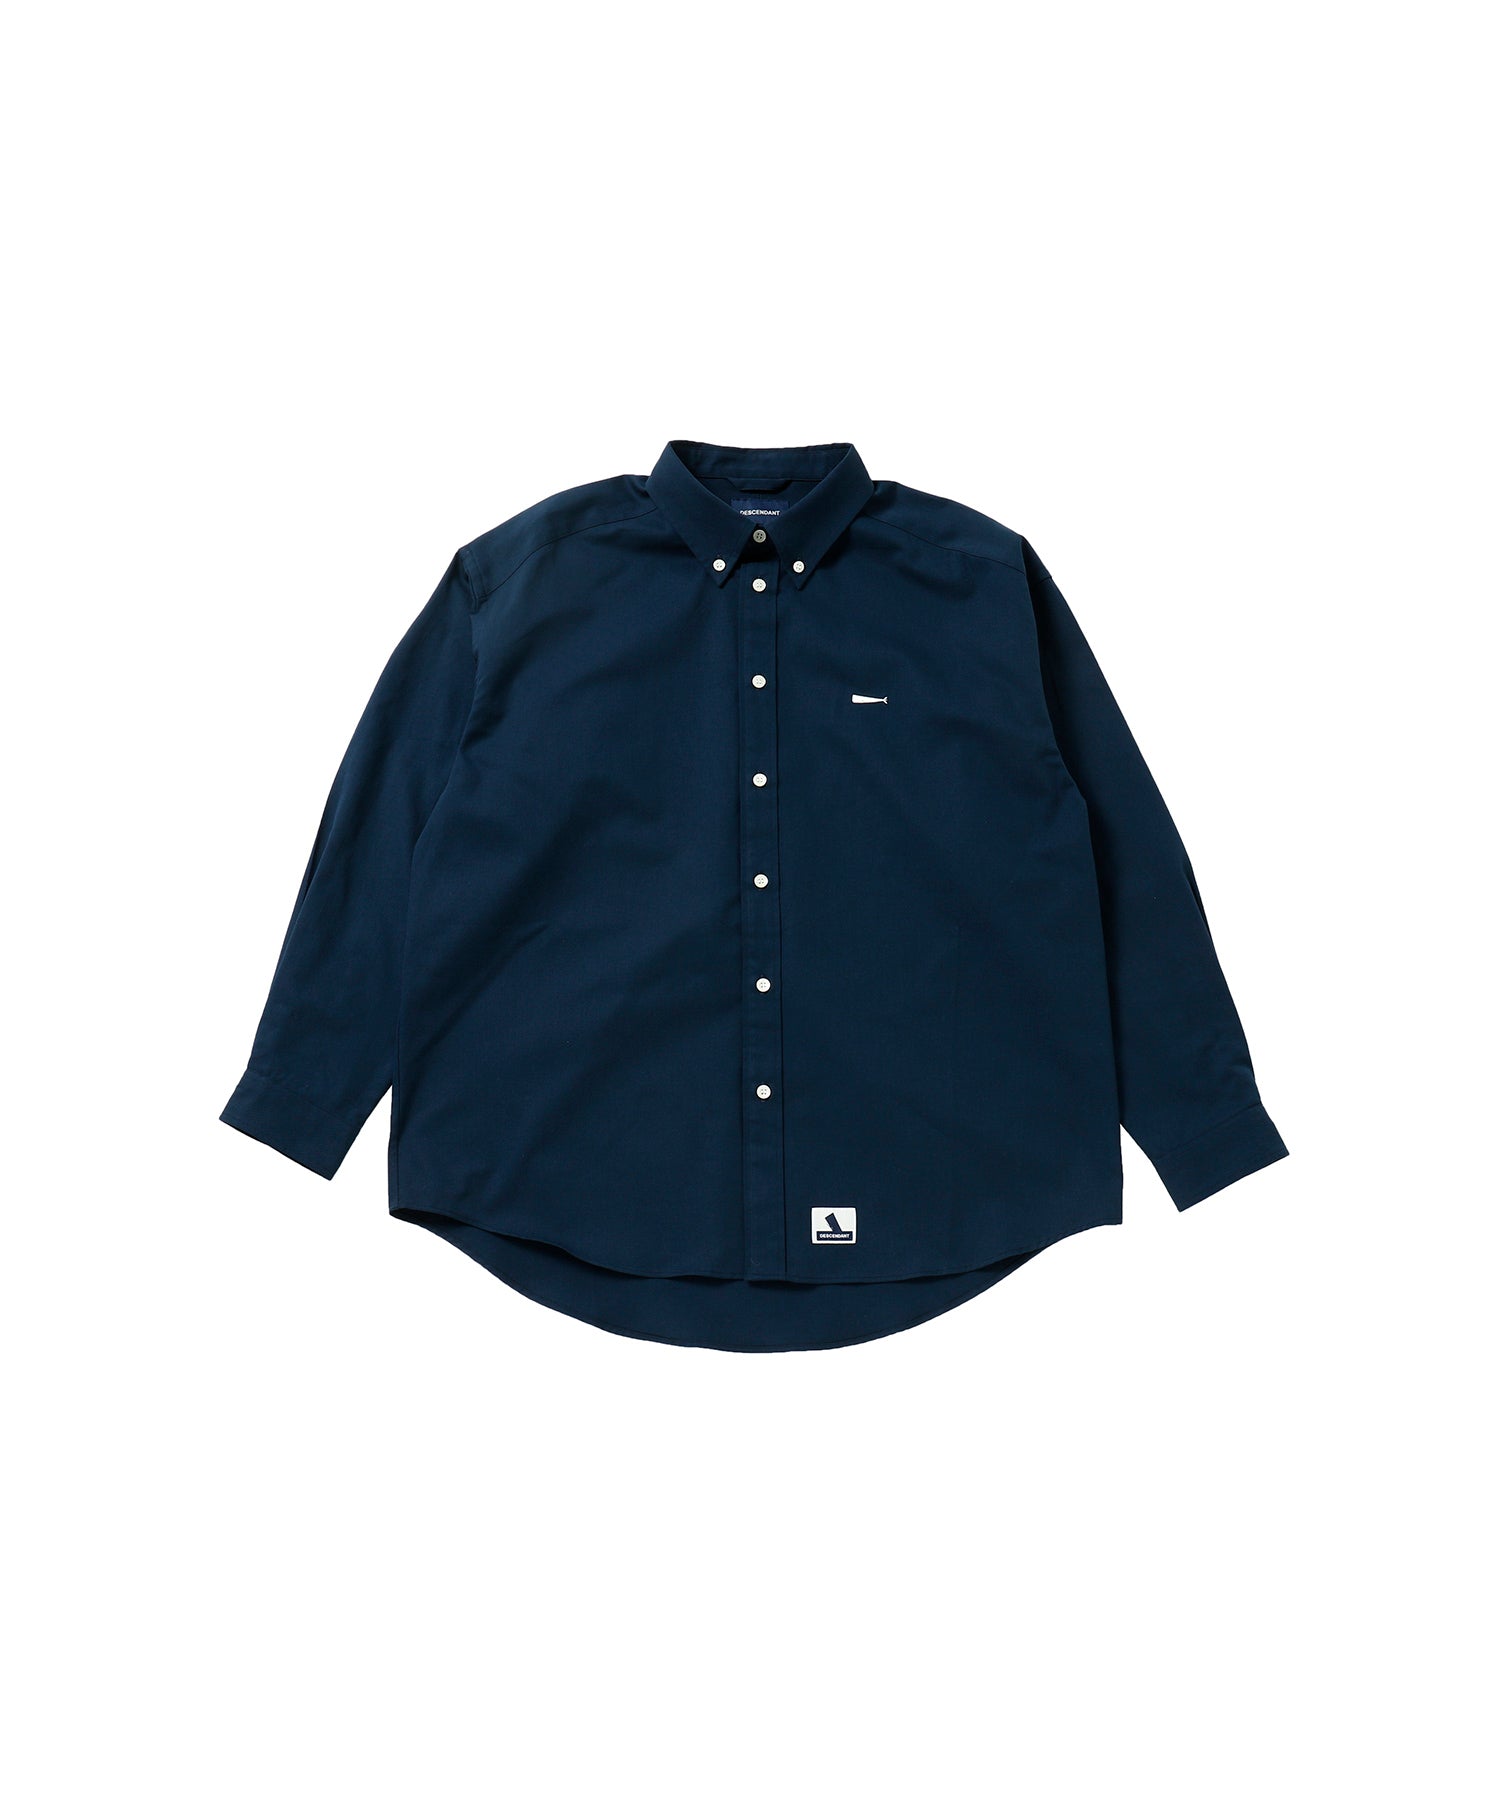 KENNEDY'S TWILL LS SHIRT - DESCENDANT (ディセンダント) - tops 